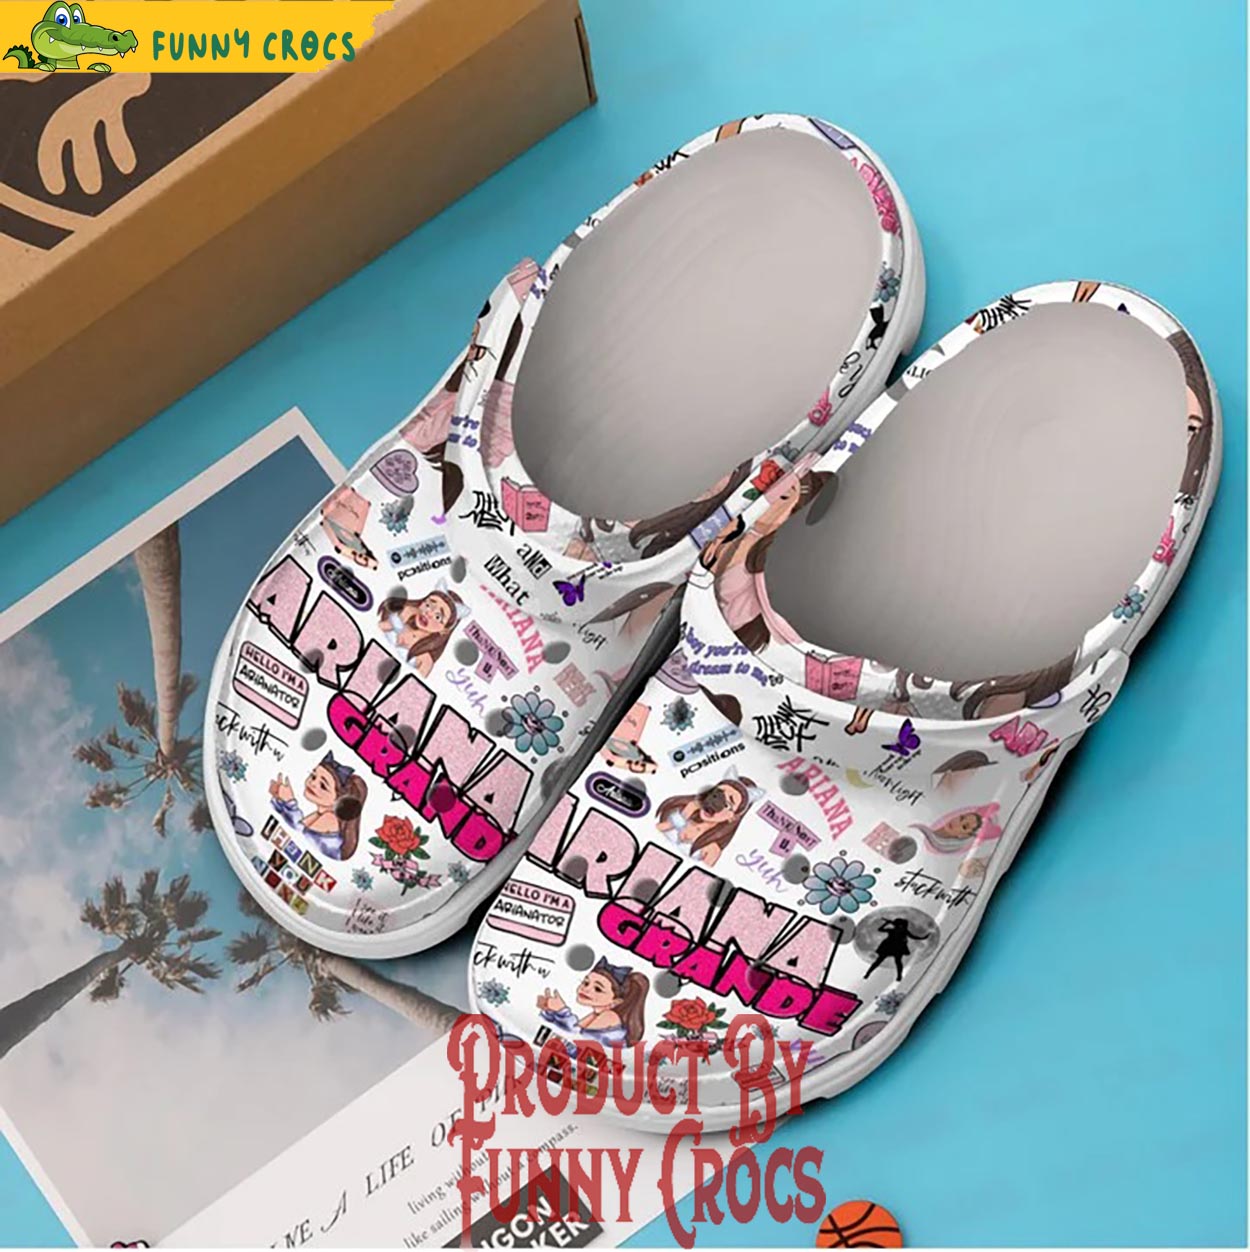 Ariana Grande Crocs Shoes - Discover Comfort And Style Clog Shoes With ...